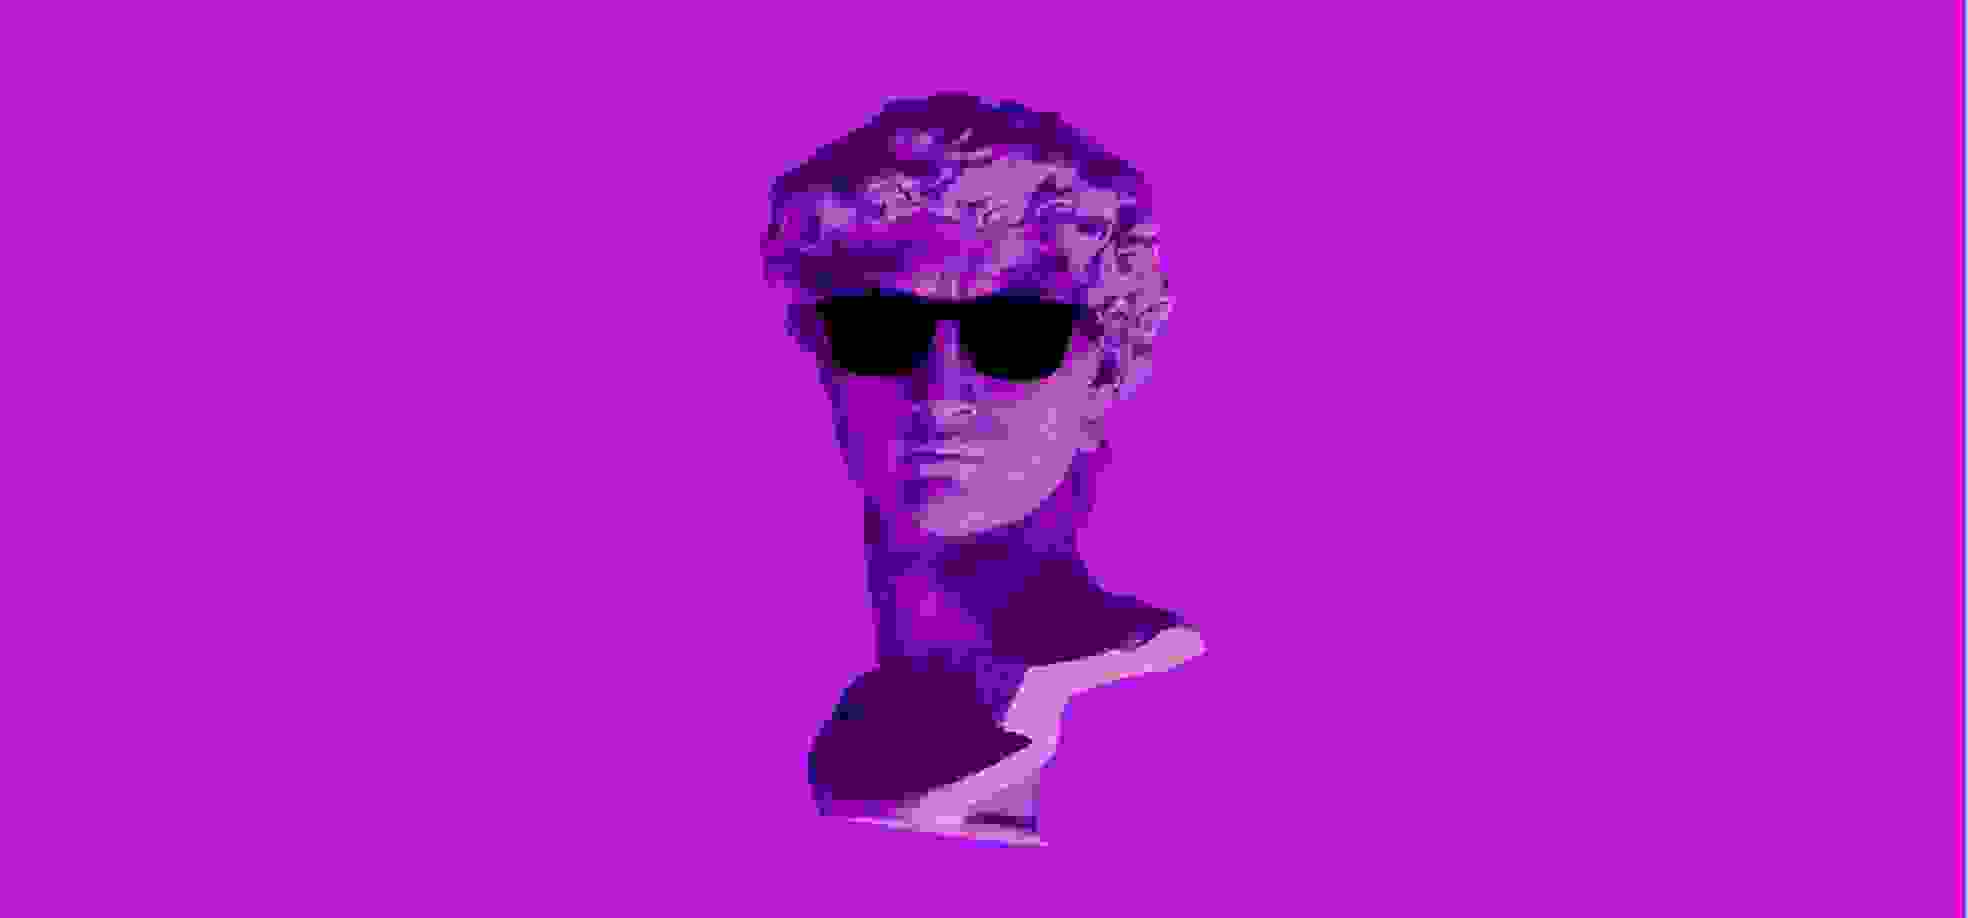 Bust of David with sunglasses illustration